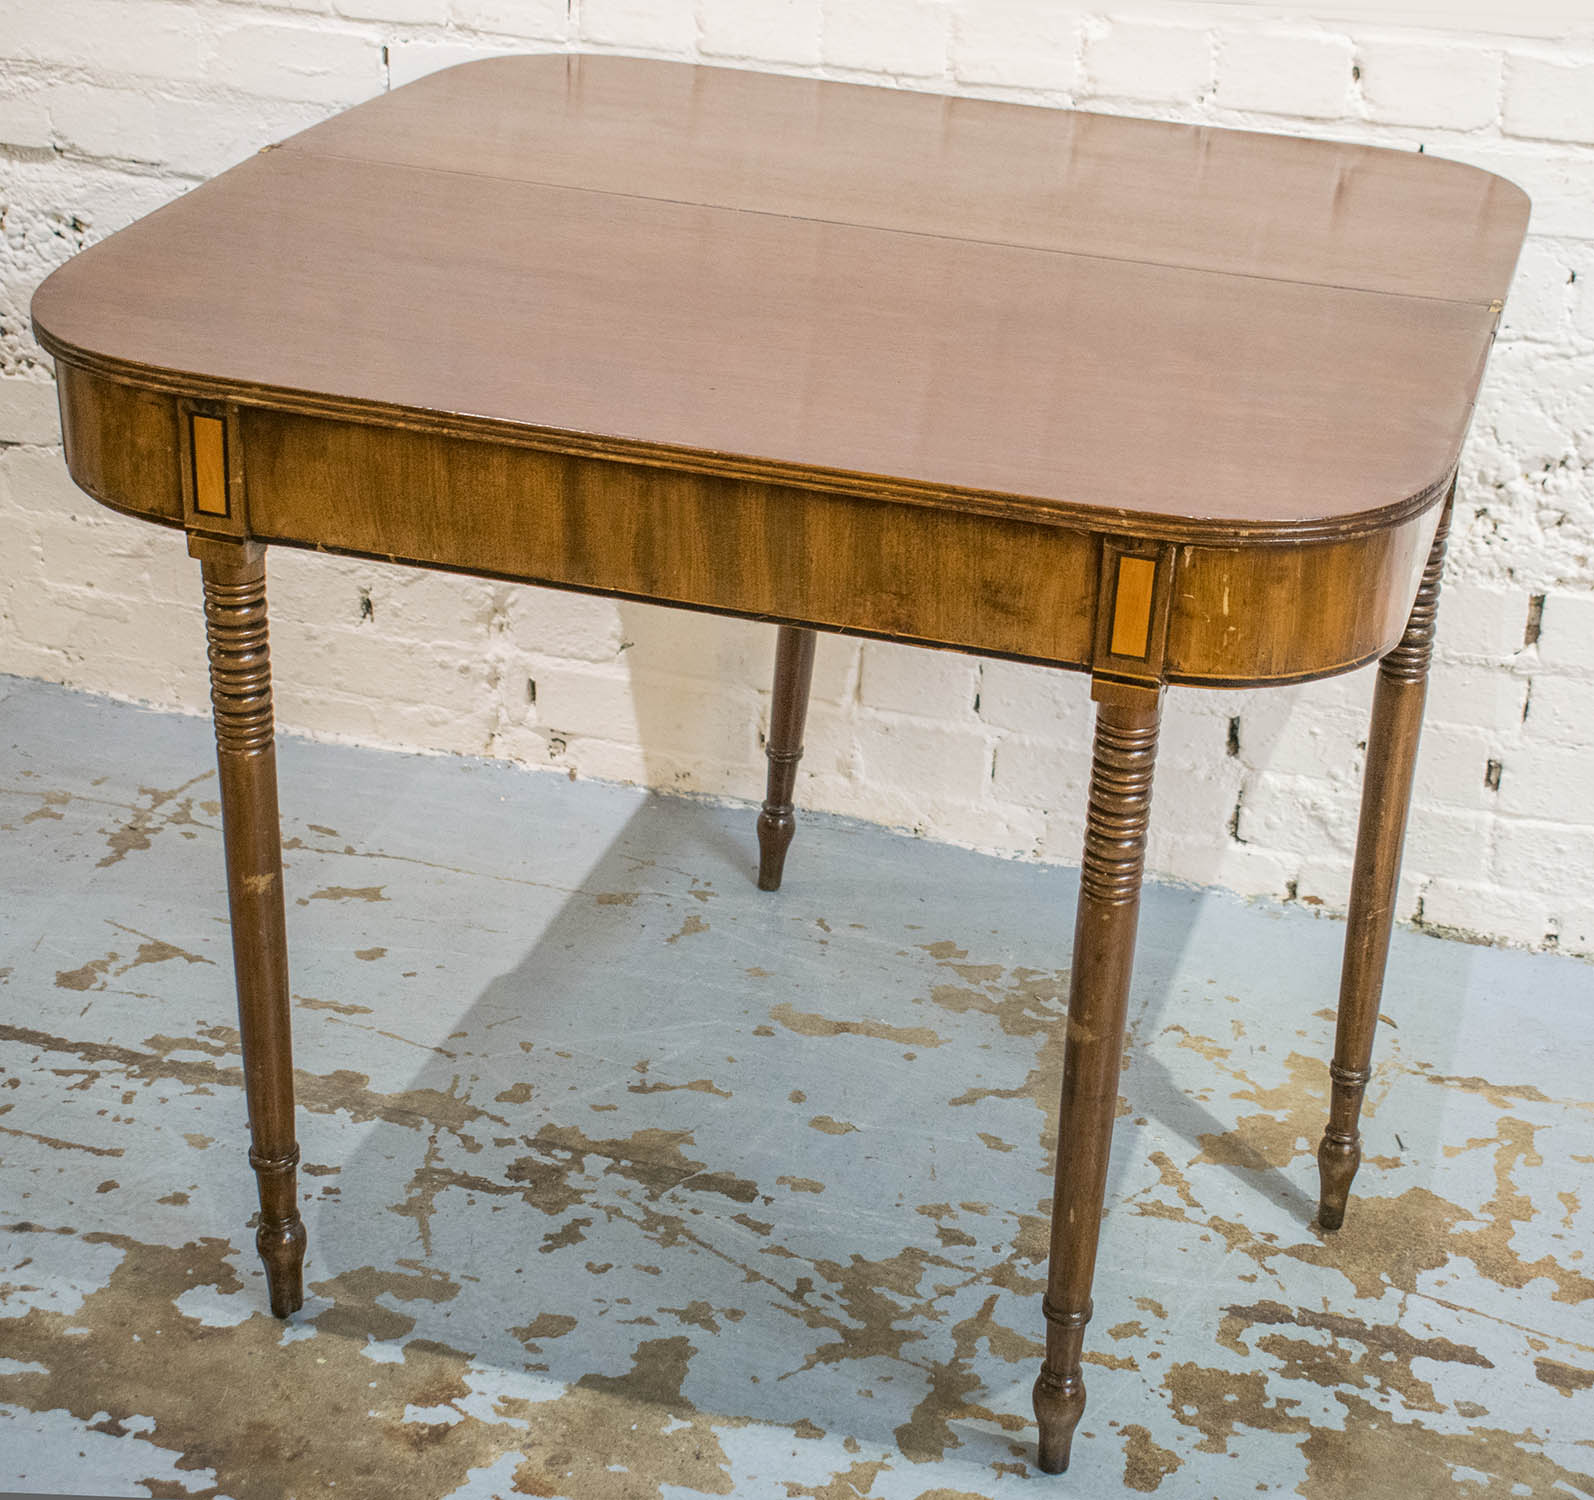 TEA TABLE, Regency mahogany with D shaped foldover top and satinwood inlaid frieze, 75cm H x 91cm - Image 3 of 3